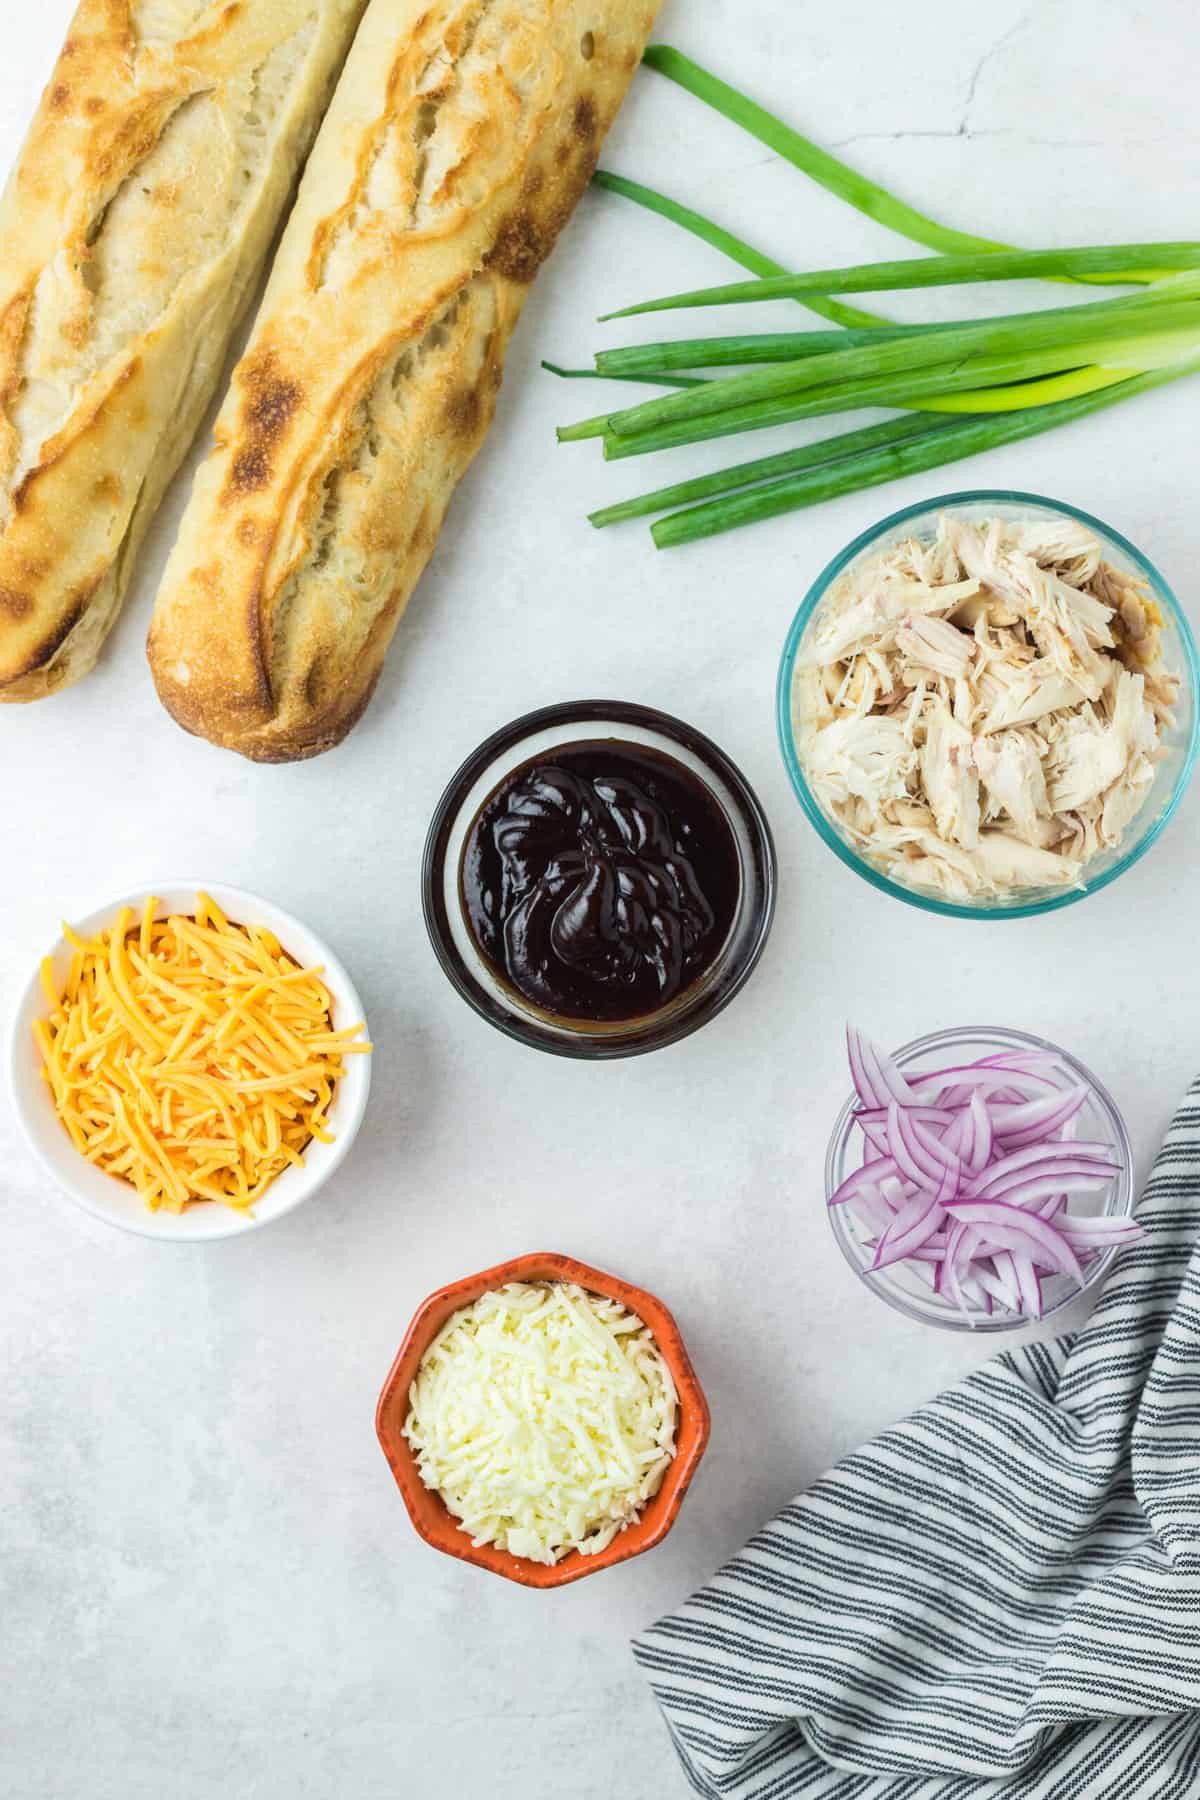 Ingredients for bbq chicken french bread pizza.